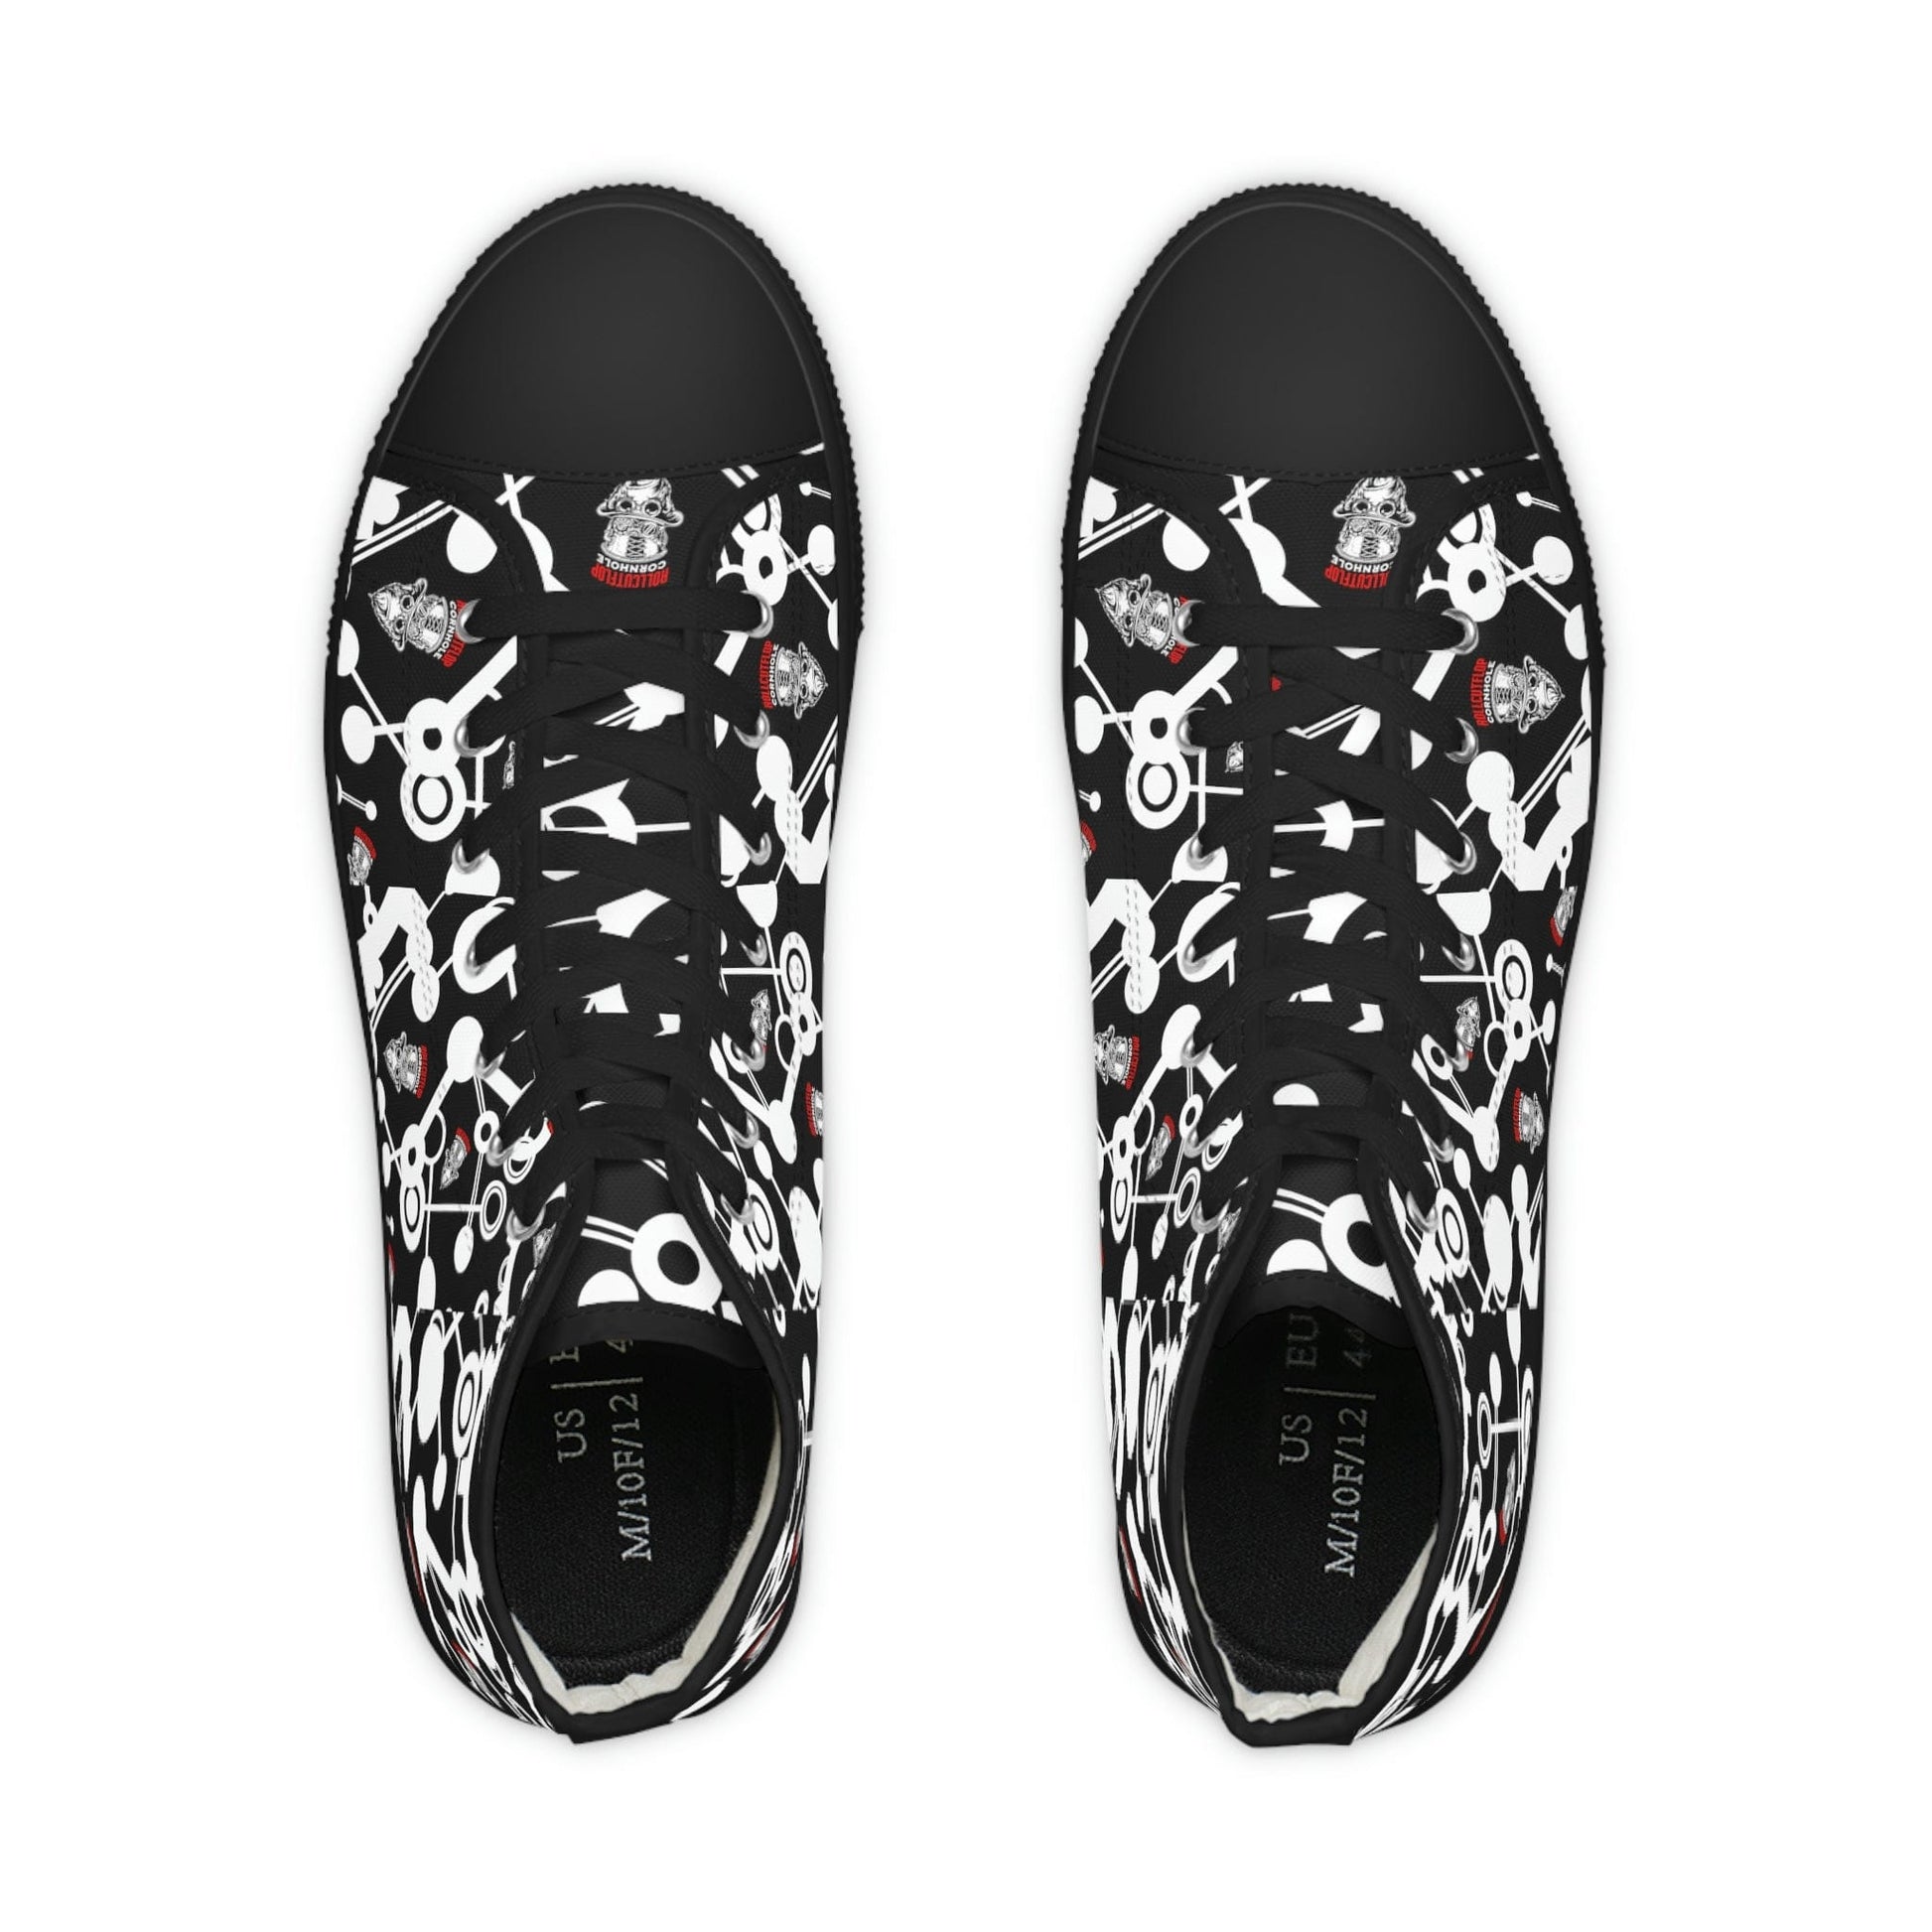 Top of Roll Cut Flop Cornhole™ All Over Print Black, Red & White Men's High Top Sneakers - Steampunk Gorilla Logo with White Gear Print